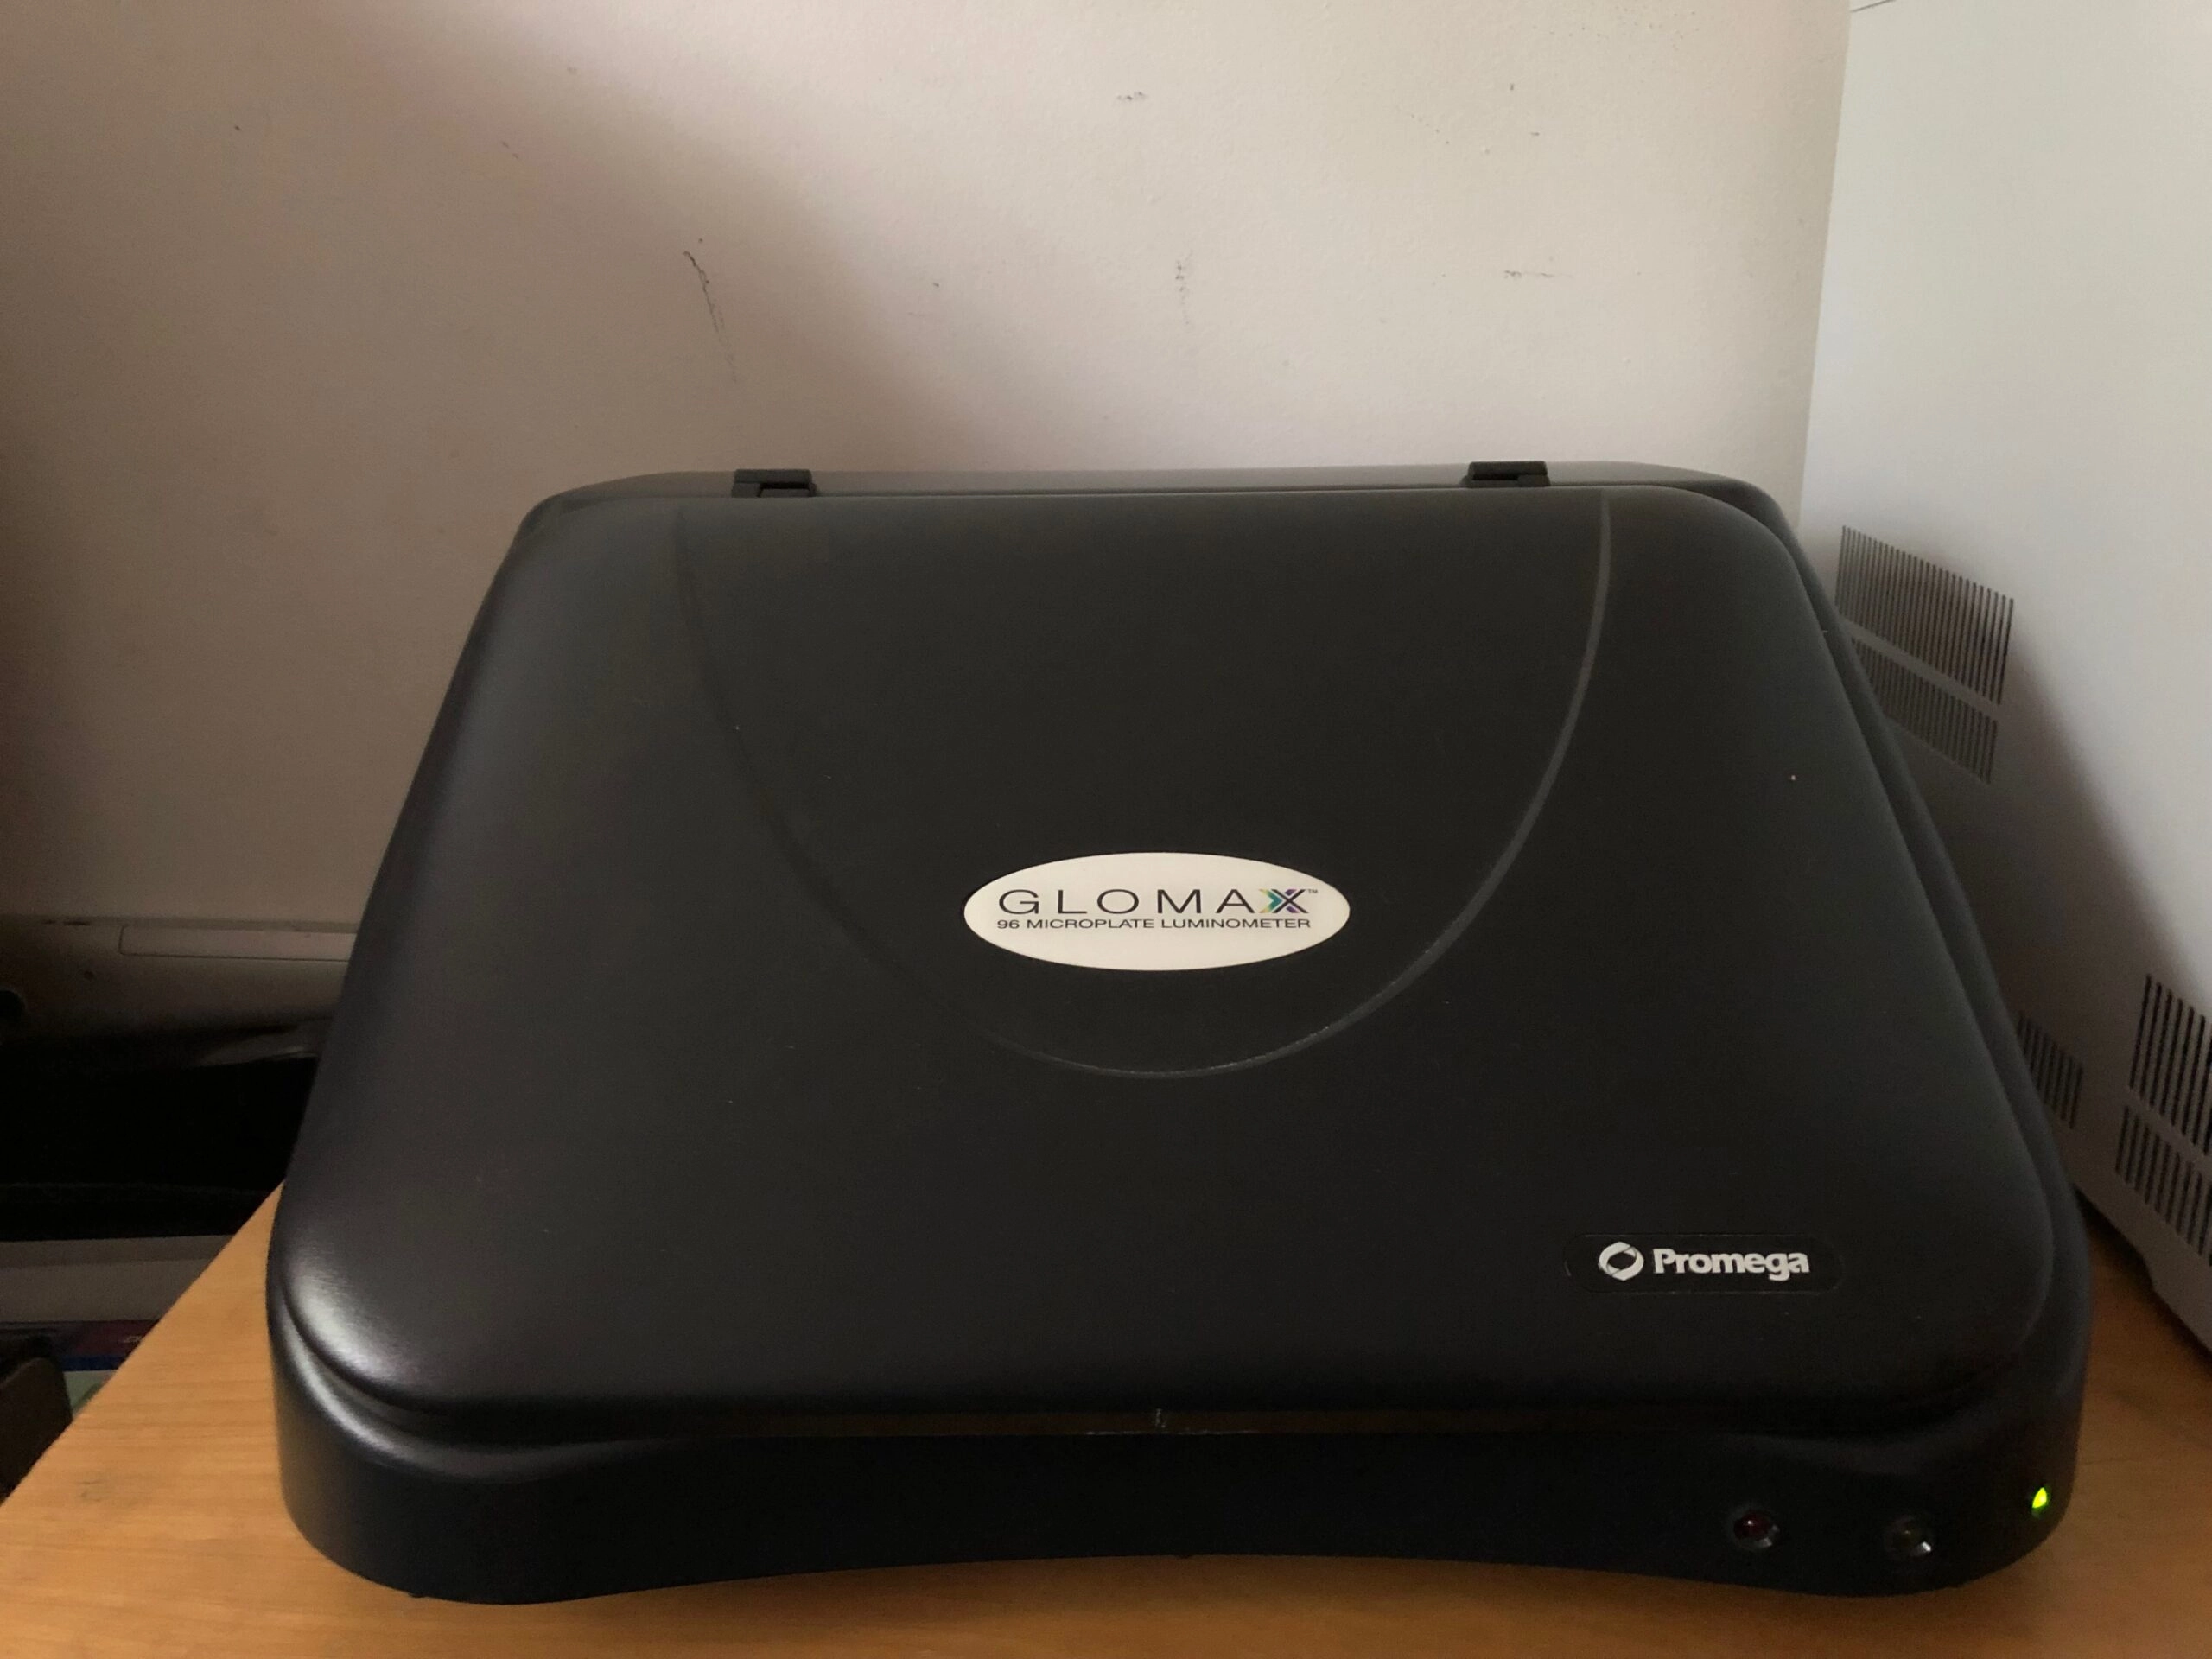 Promega GloMax 96 Highly Sensitive Microplate Luminometer with Software